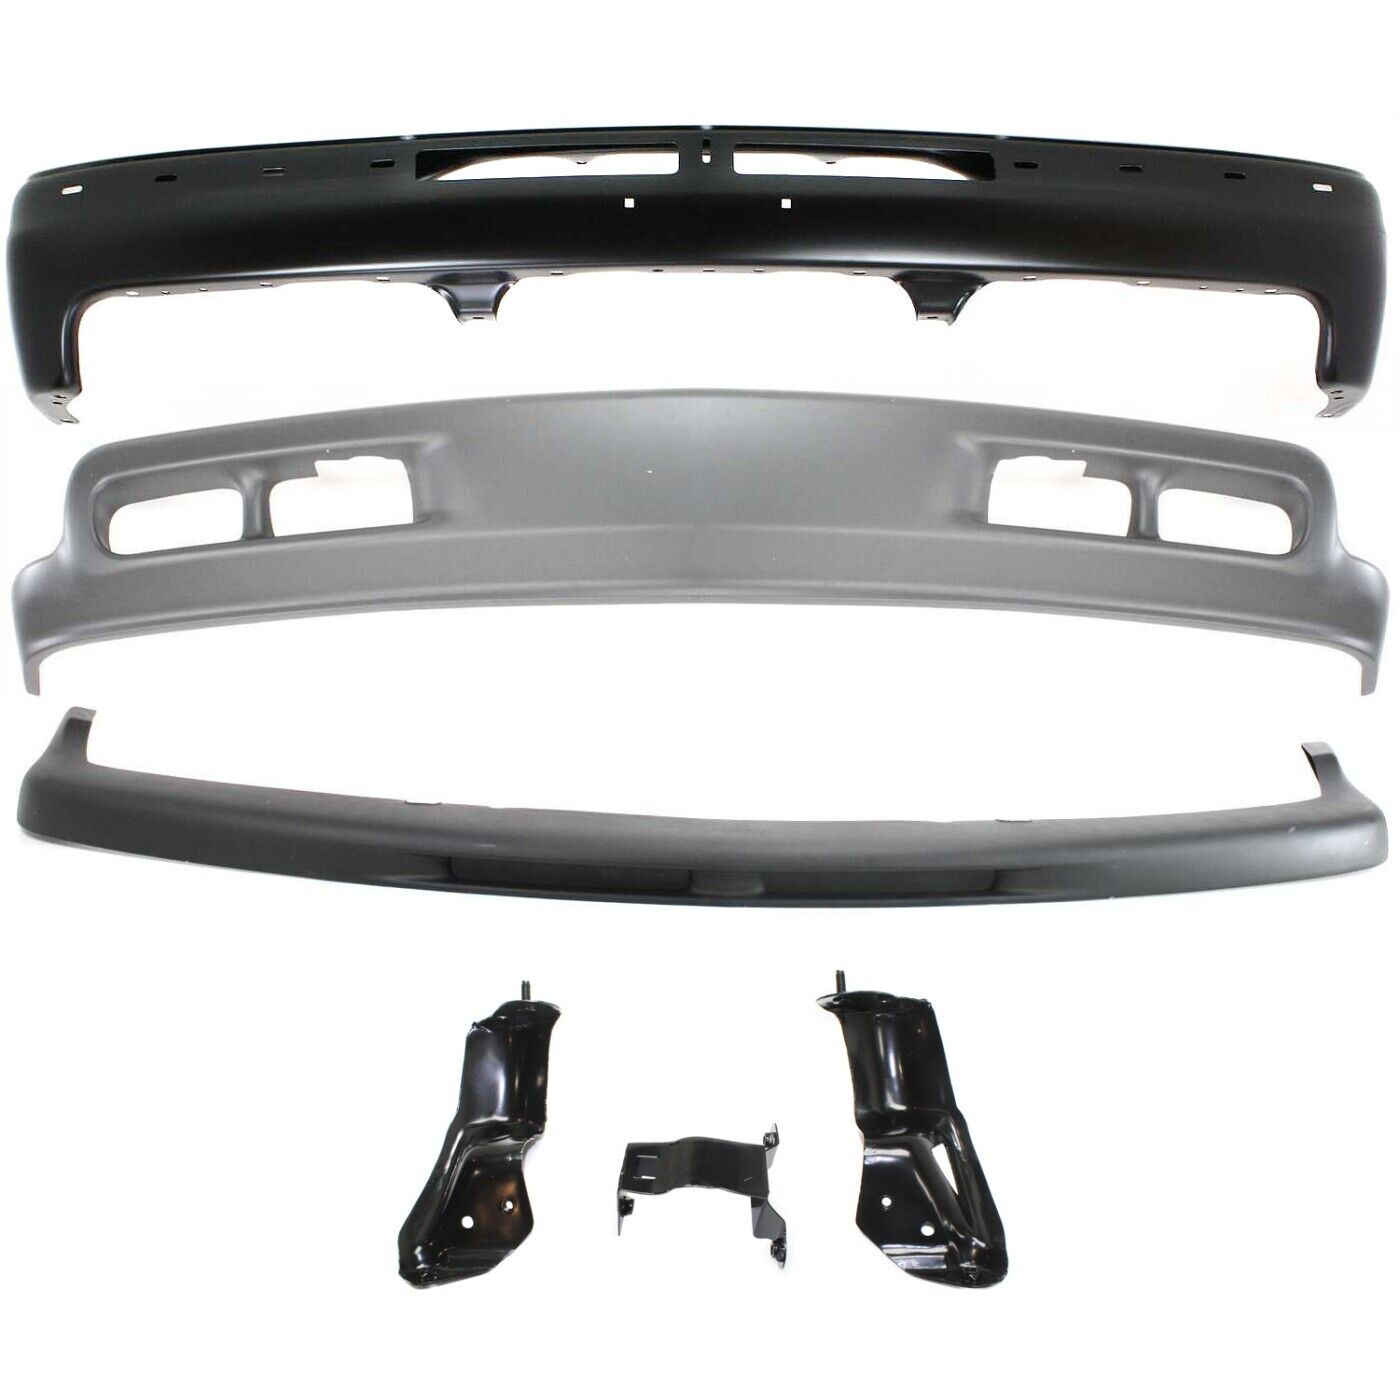 Front Bumper Kit For 2000-2004 Chevy Suburban 1500 2000-2006 Tahoe Primed Steel